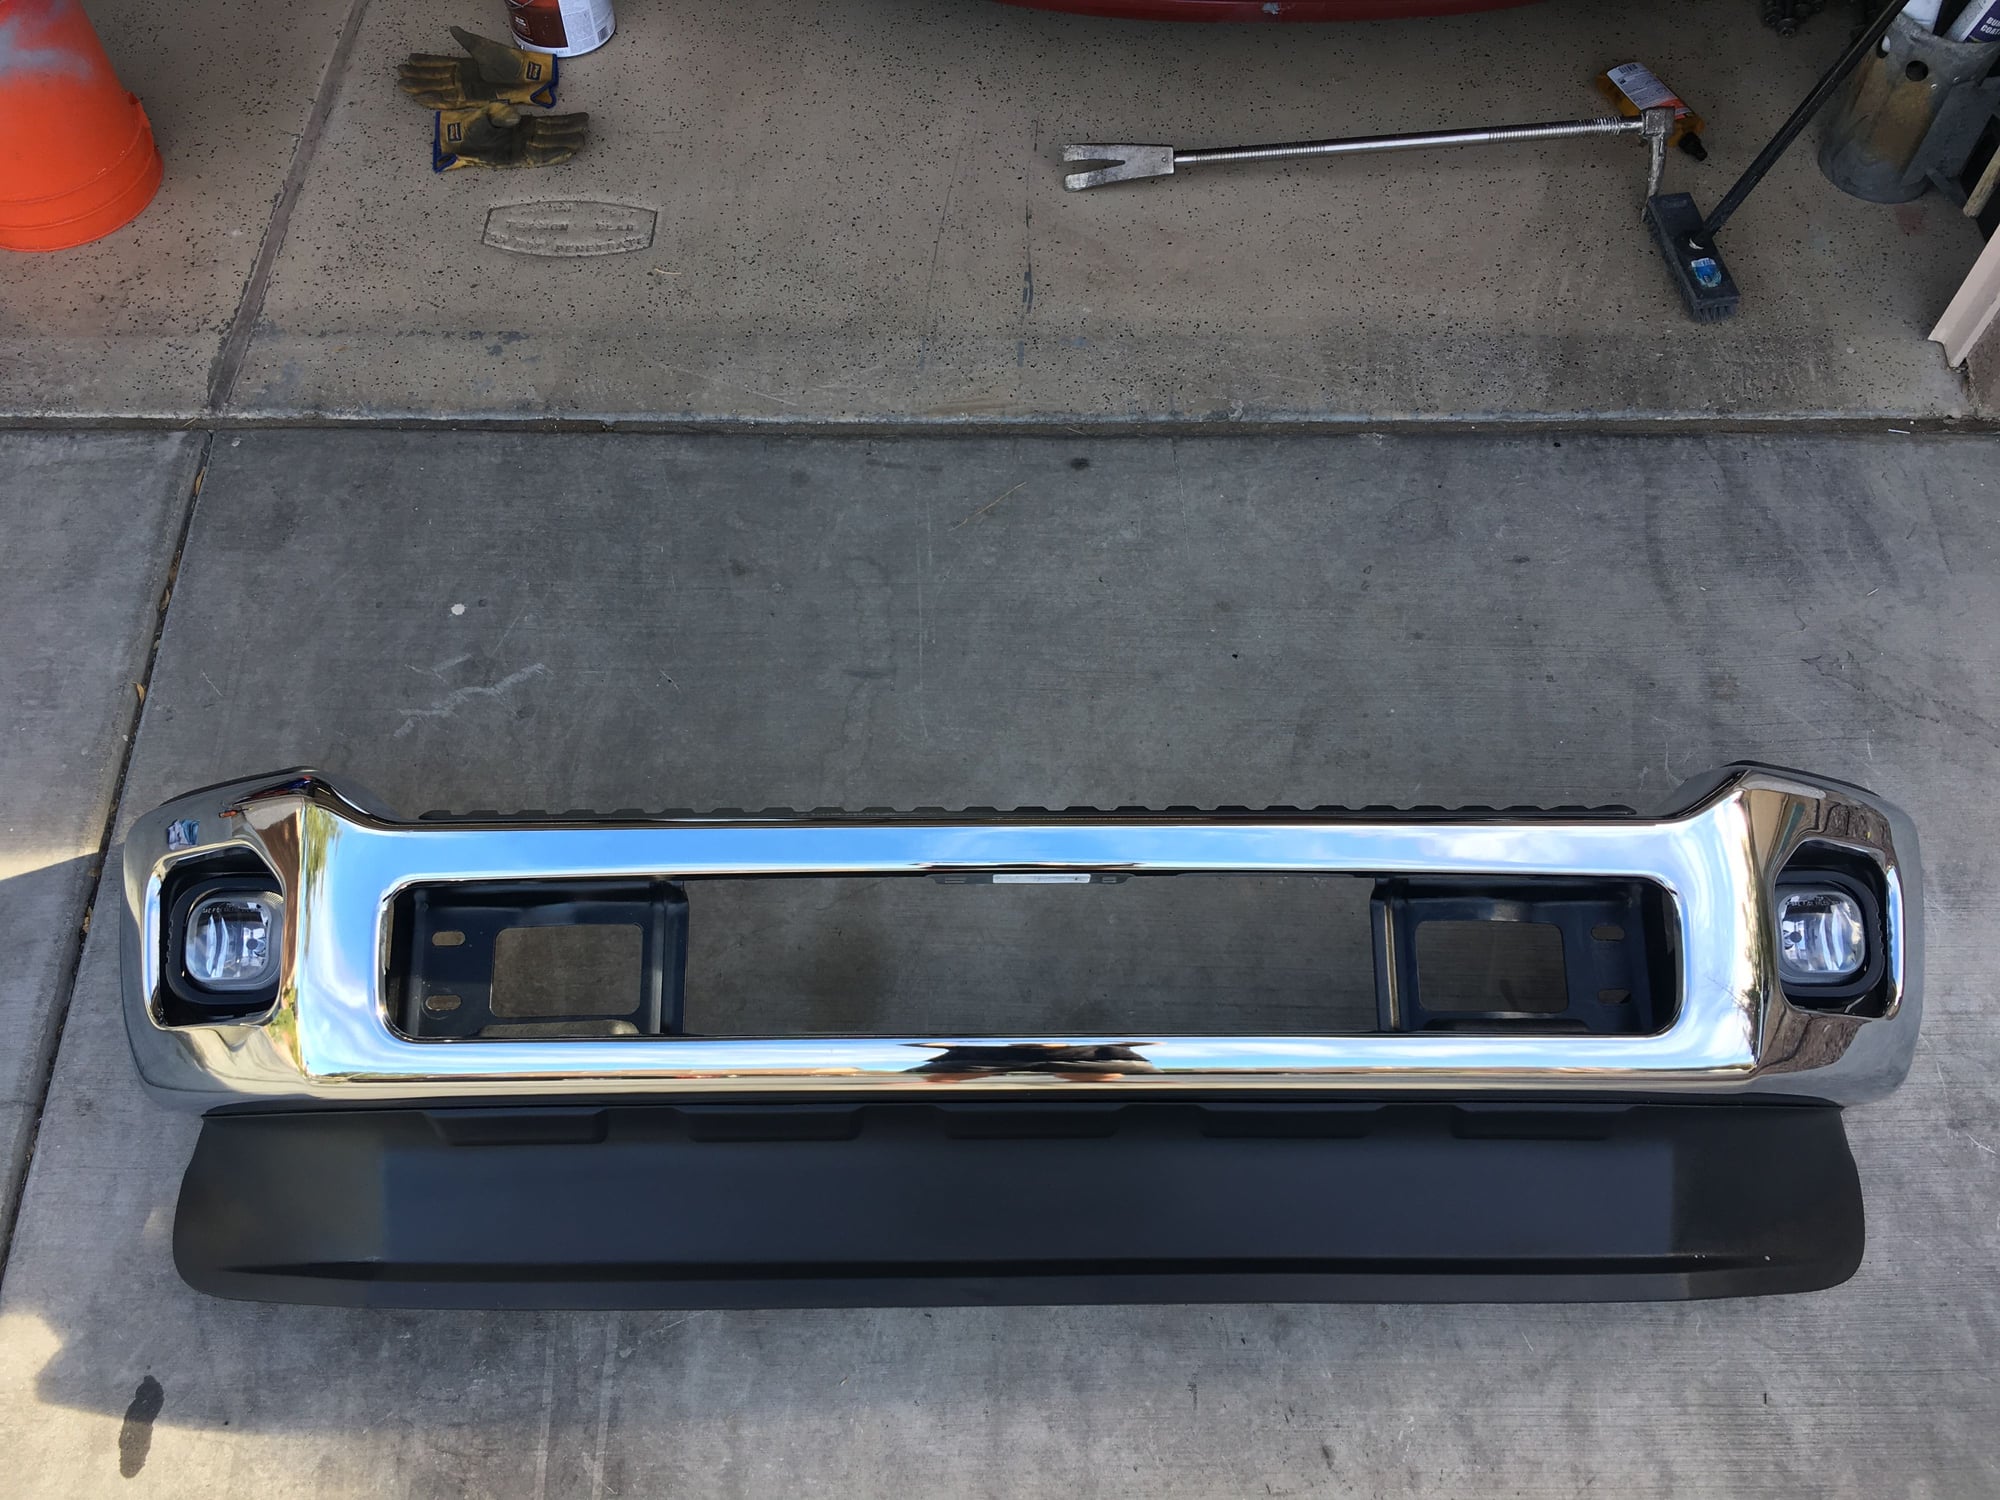 Exterior Body Parts - 2011-16 F250/F350 Front Bumper - Used - Las Vegas, NV 89084, United States